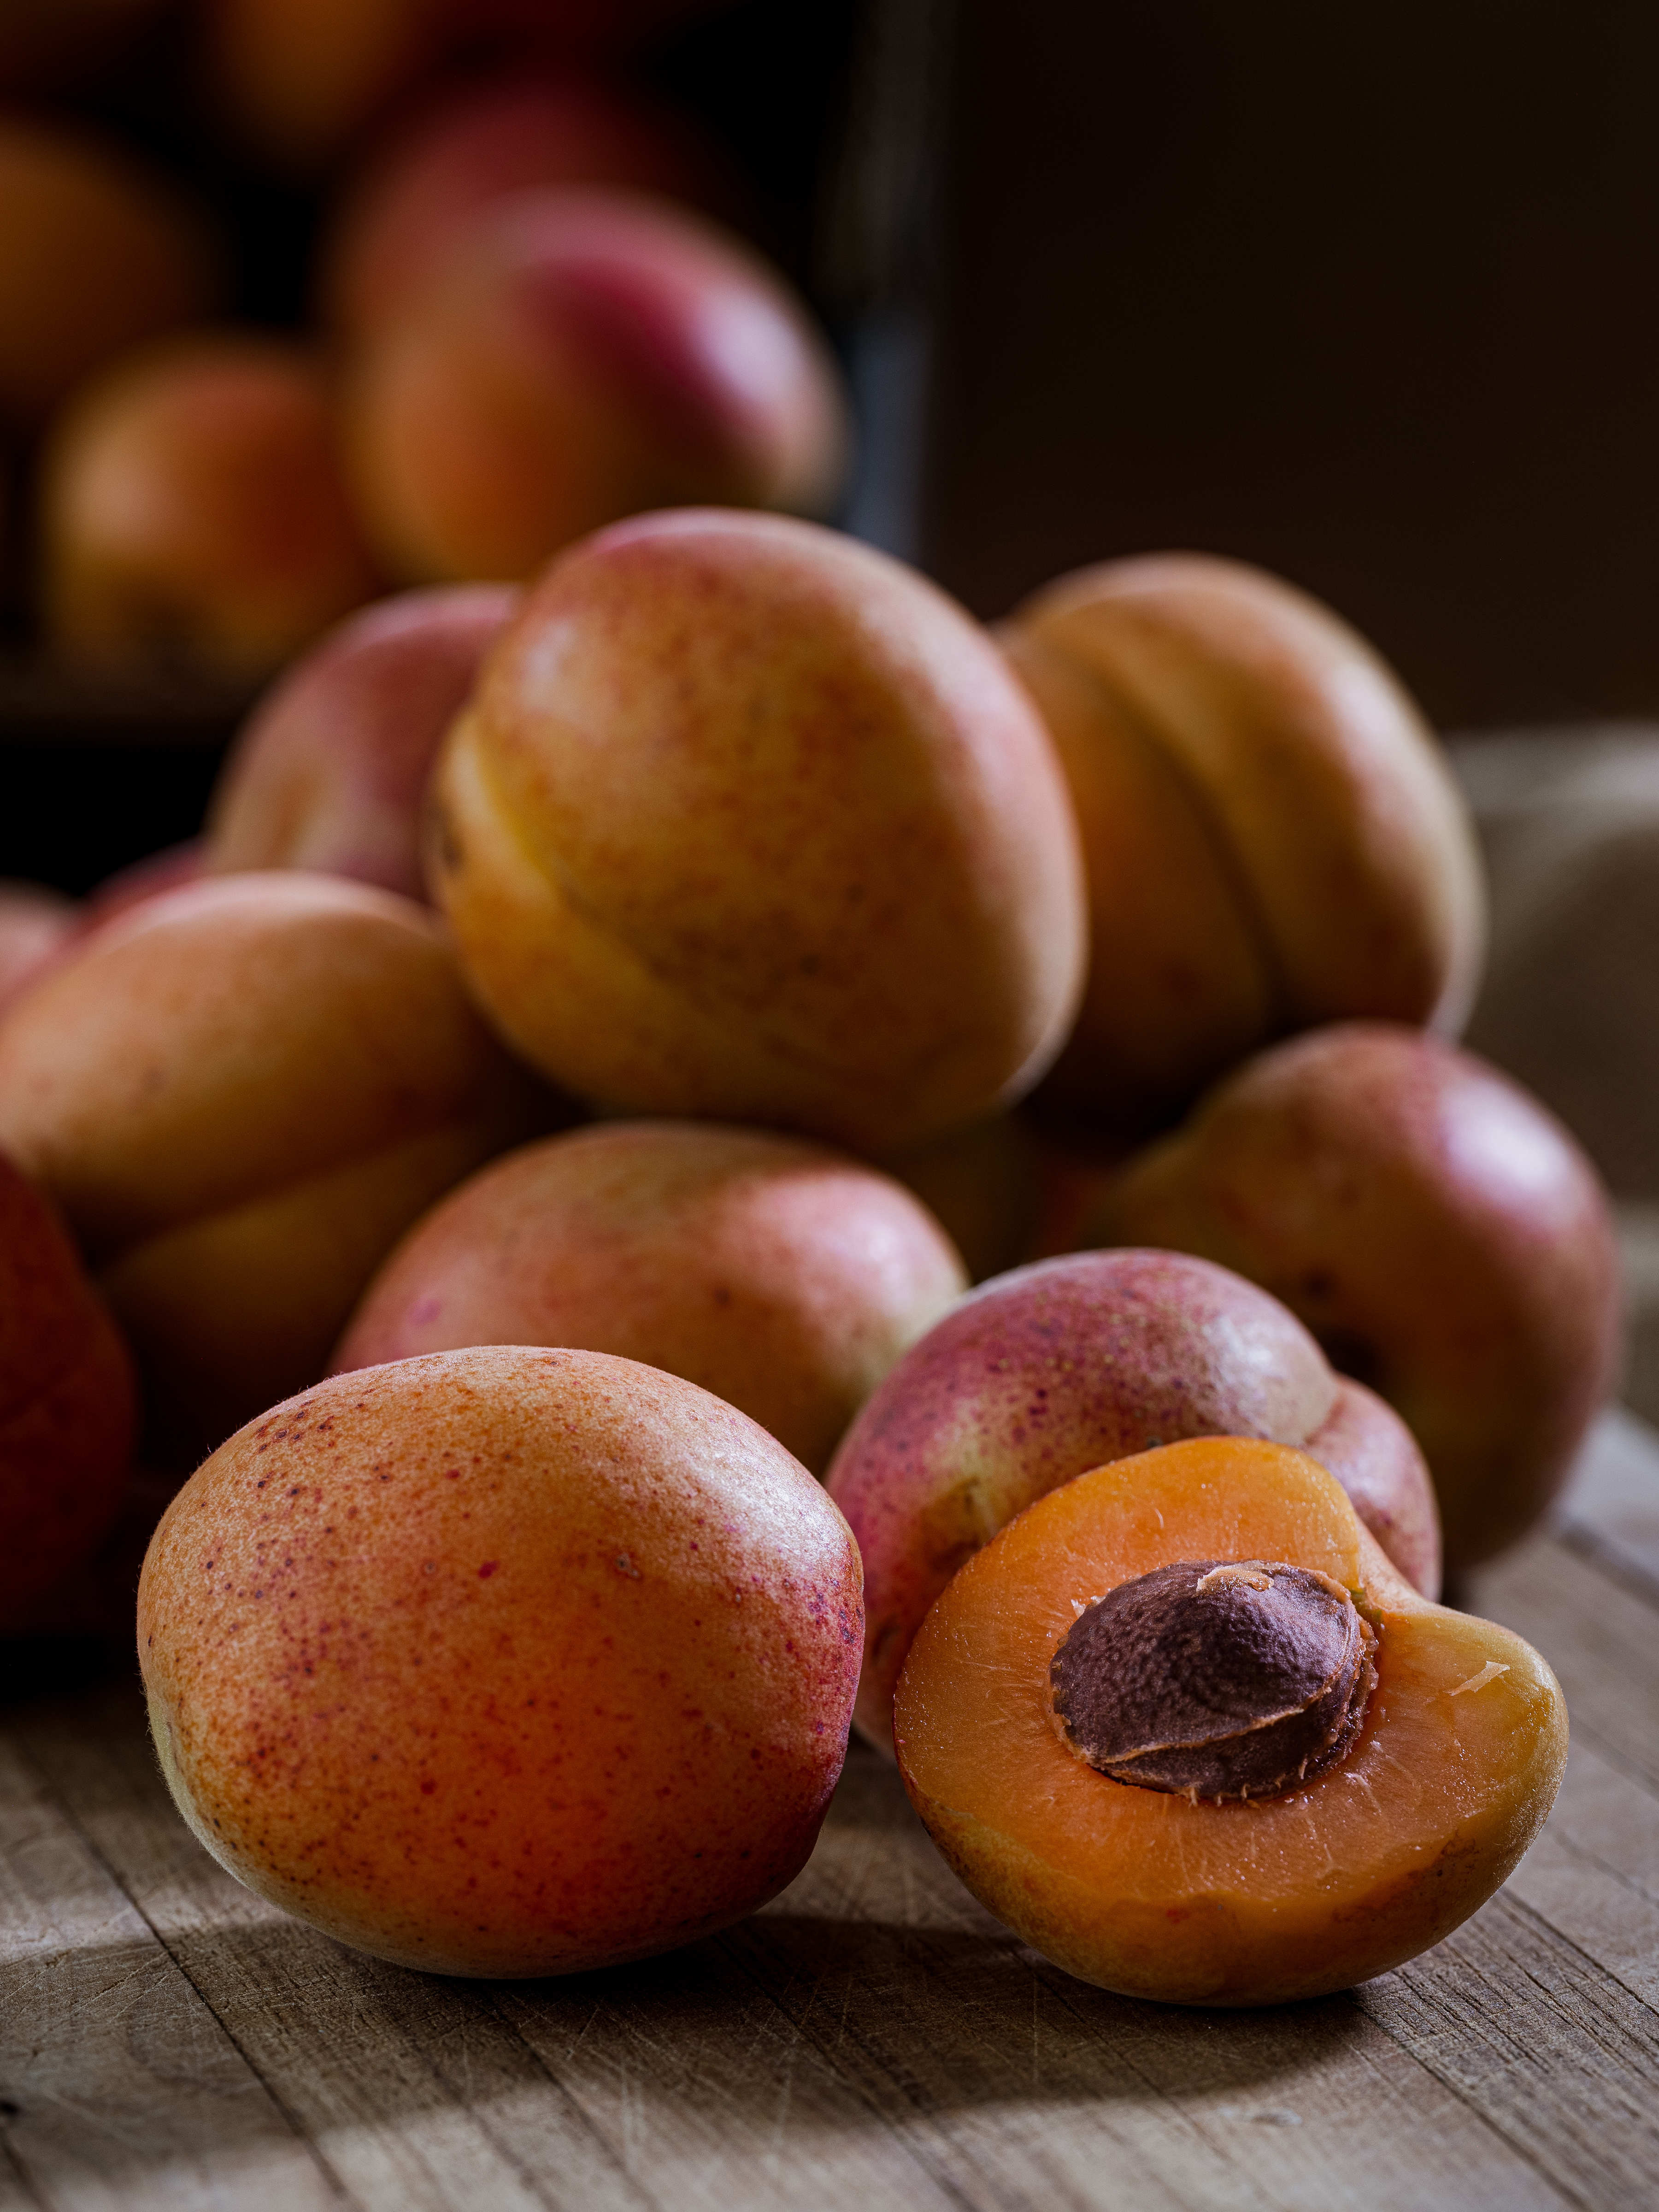 Apricots by Lowdina Orchard, Southern Tasmania. Photo: Andrew Wilson.